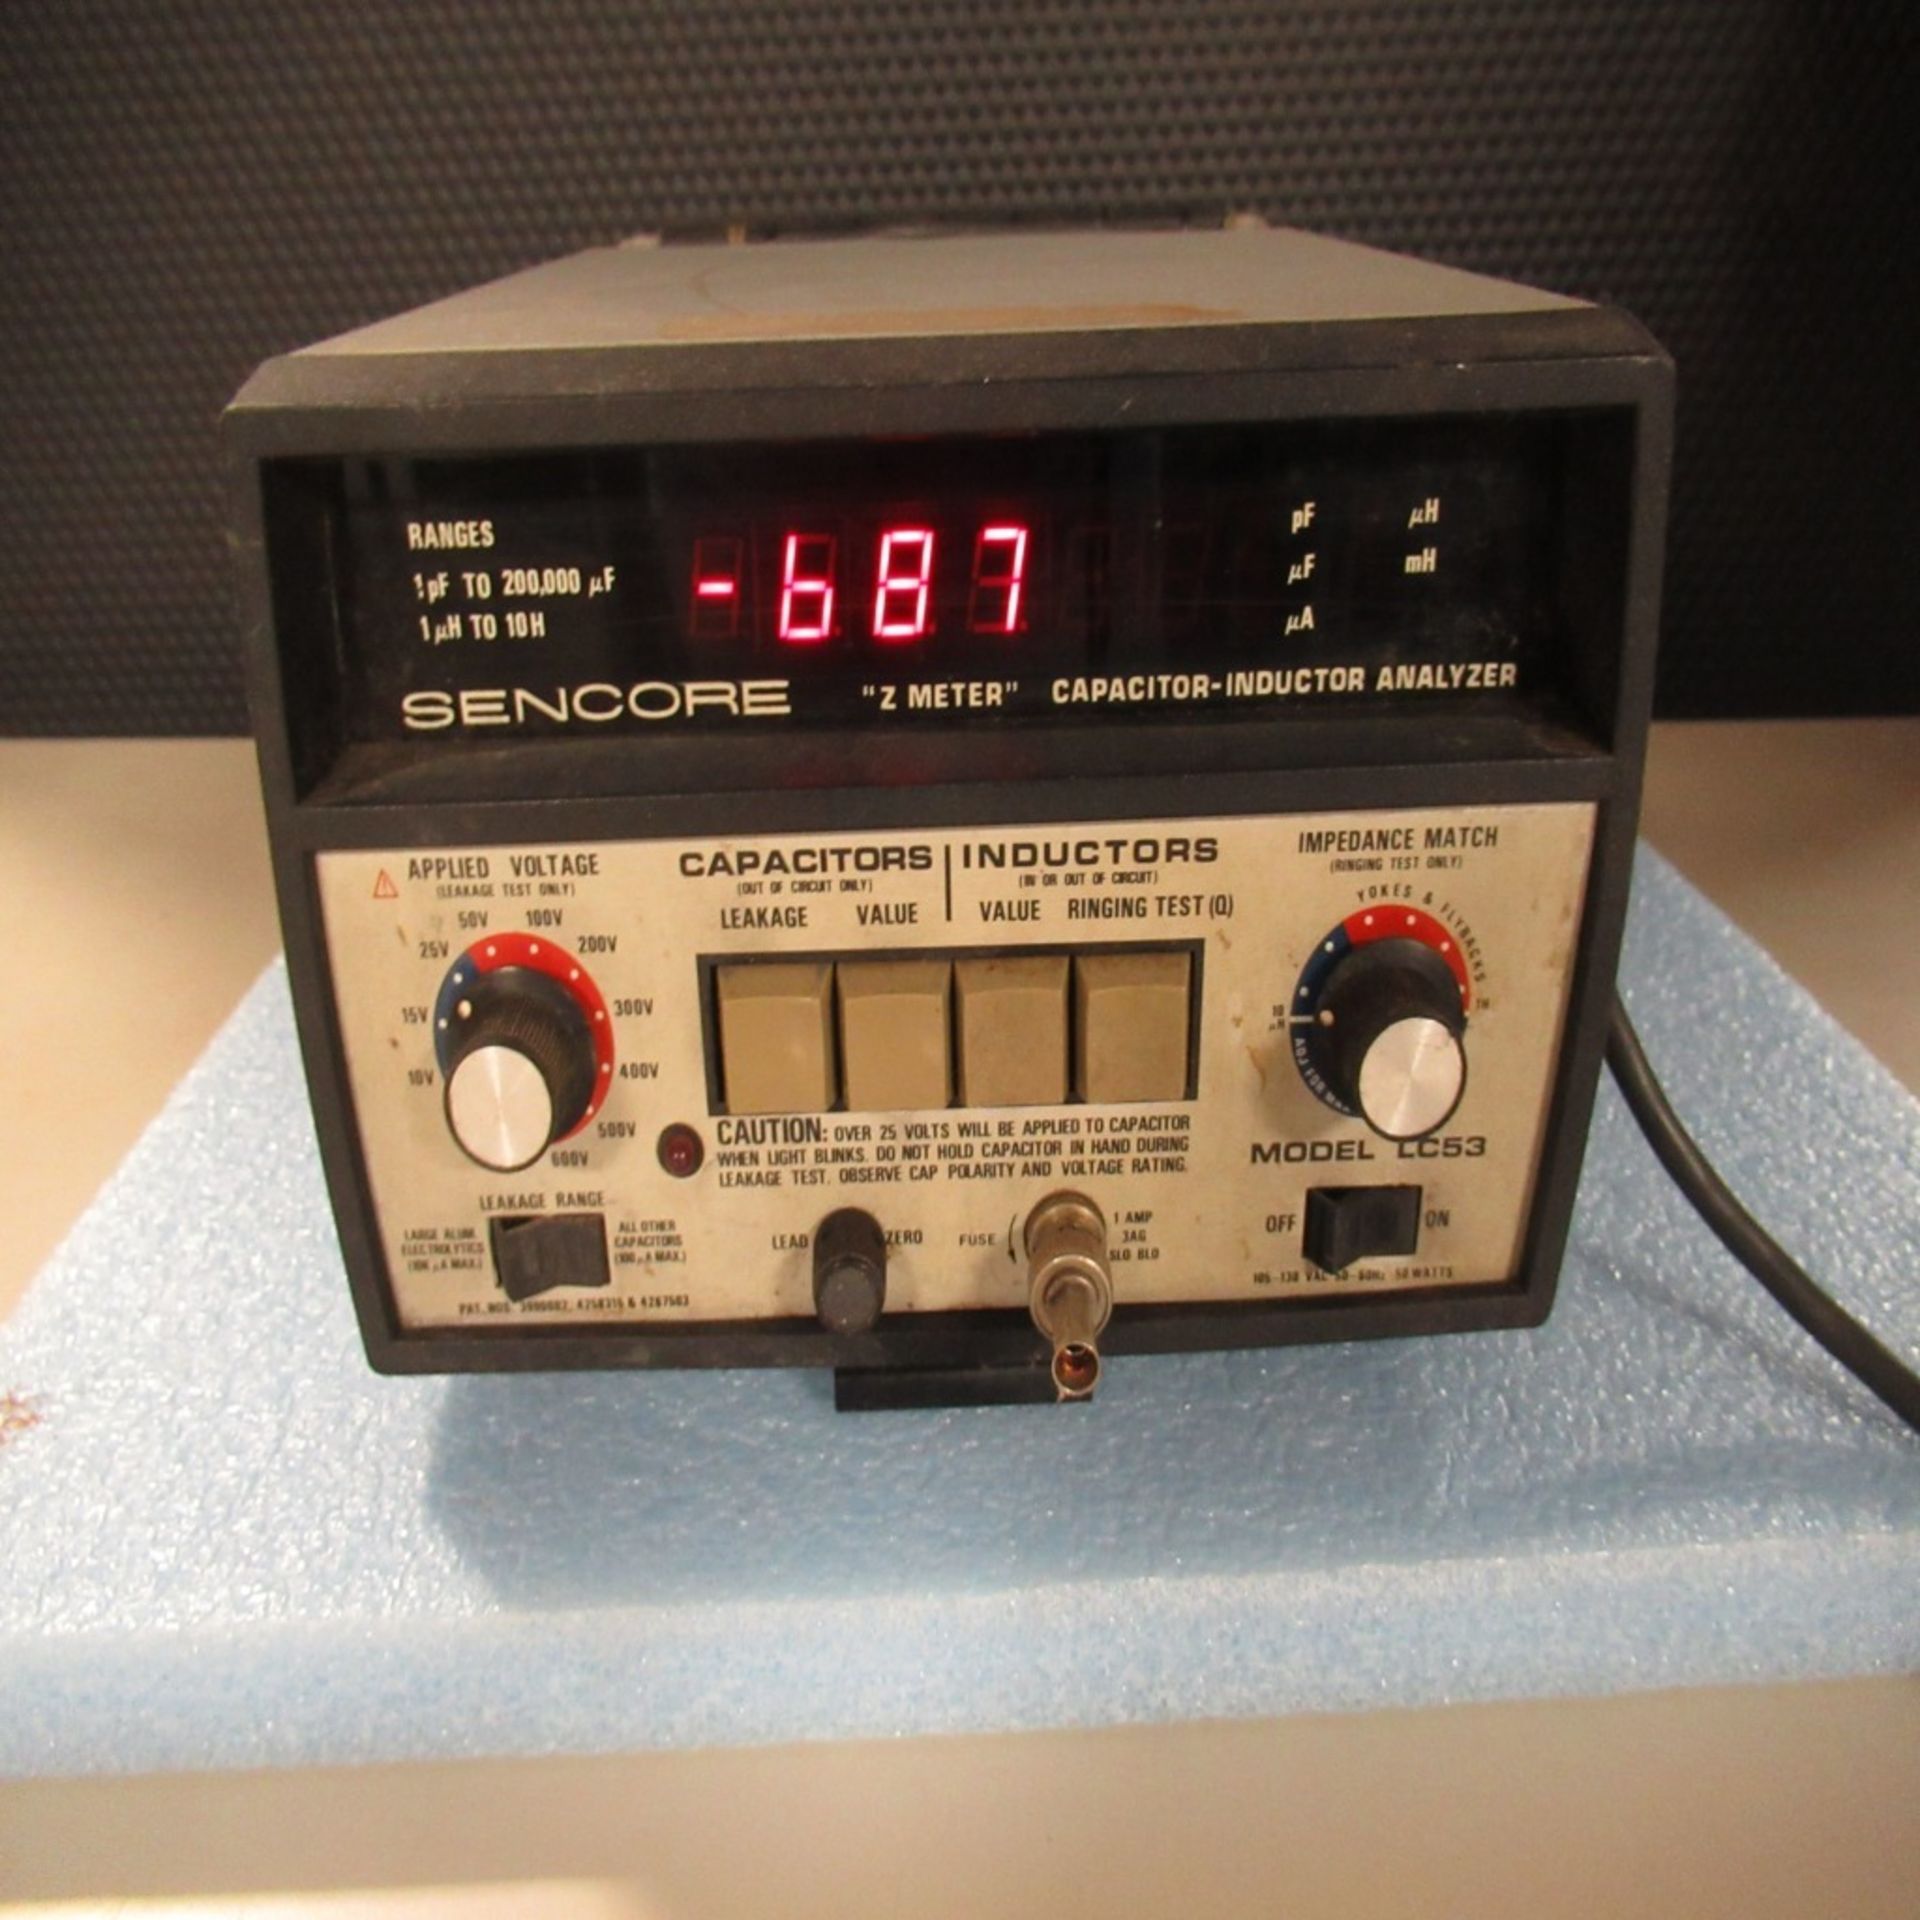 PHOTON SNAP SHOT MODEL 6000 *POWERS ON* NO SCREEN DISPLAY; FARNELL AP20-80 REGULATED POWER SUPPLY * - Image 145 of 222